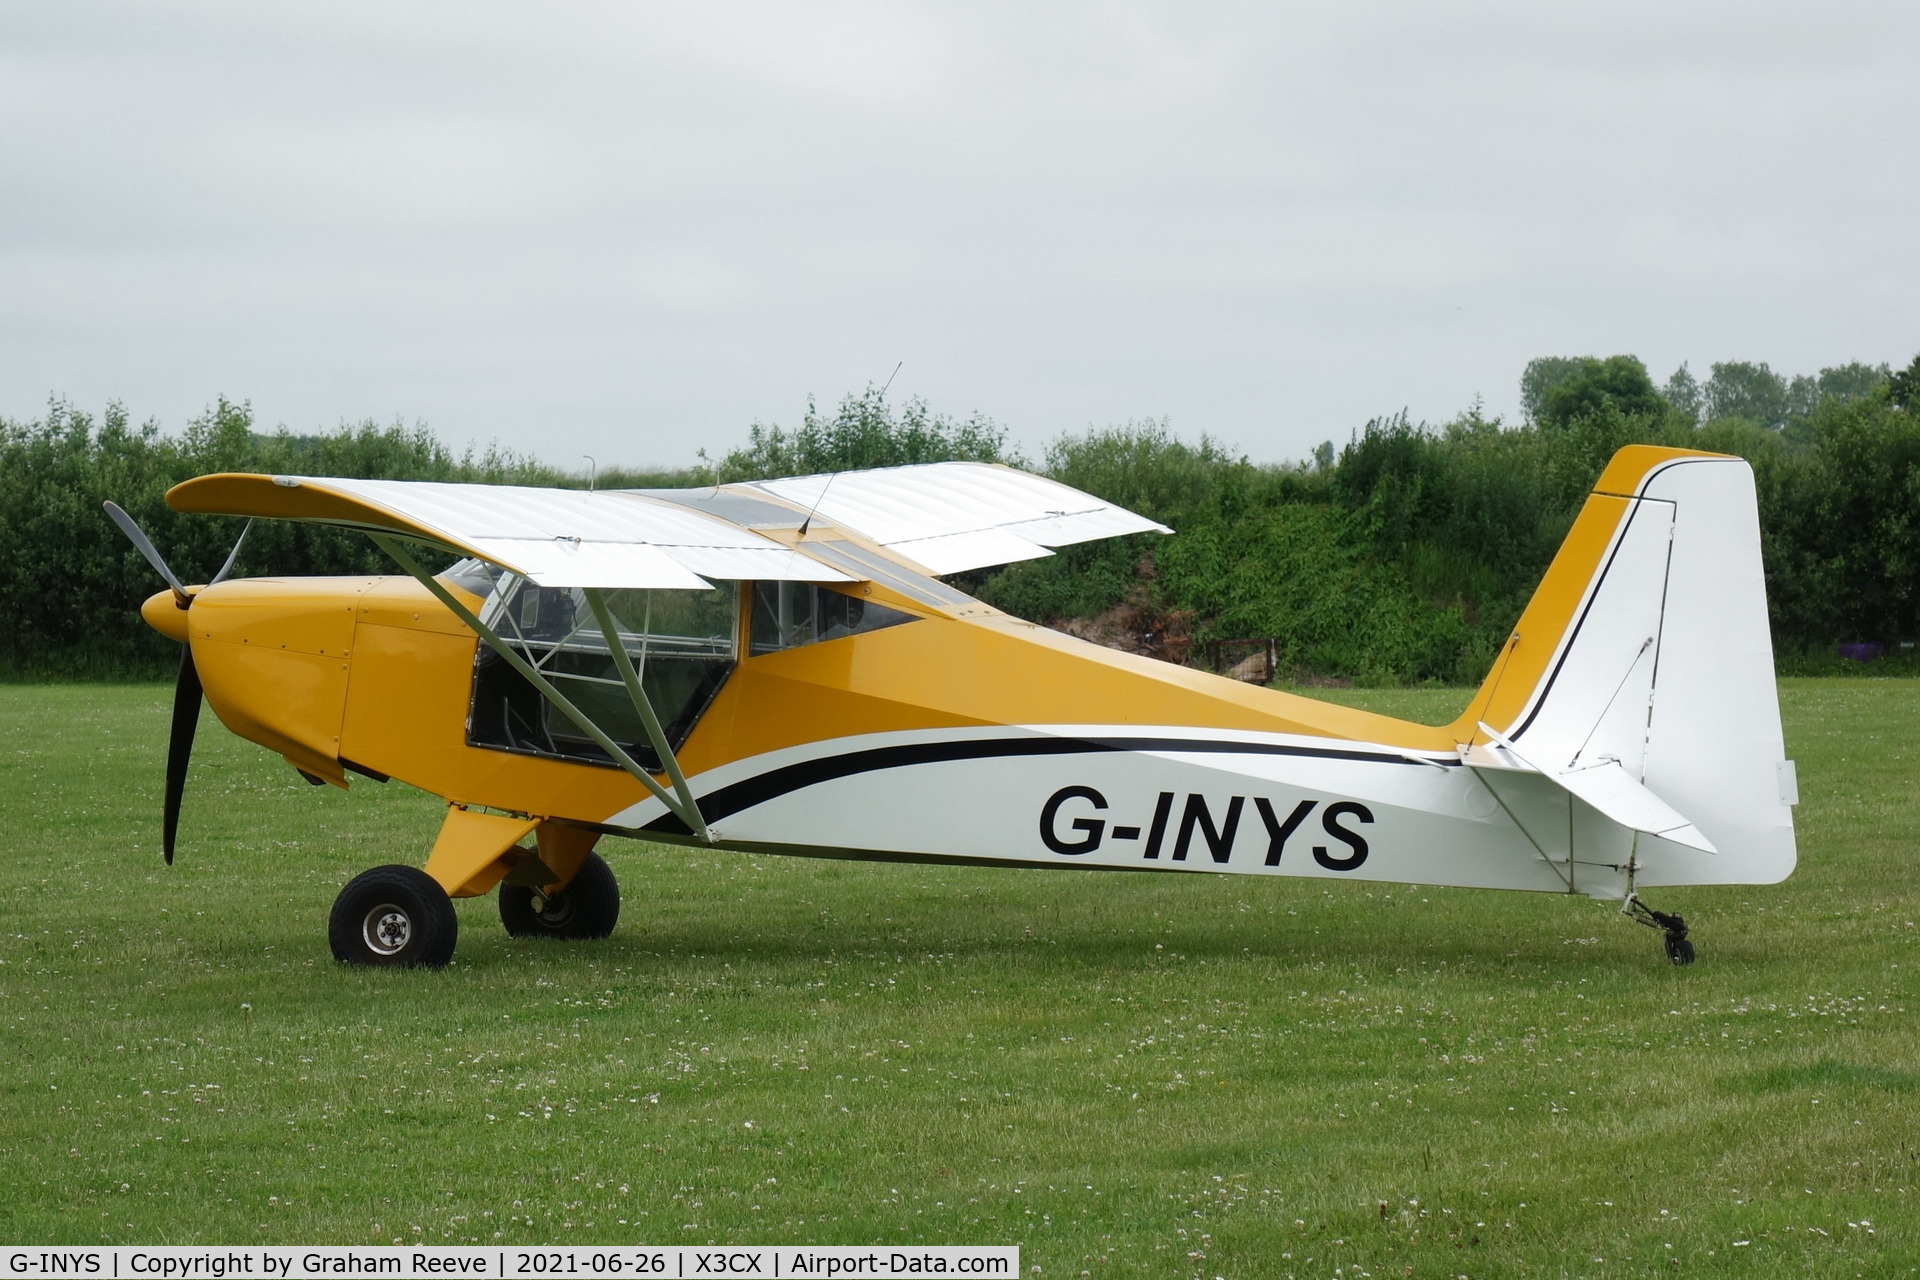 G-INYS, 2018 TLAC Sherwood Scout C/N LAA 345-15538, Parked at Northrepps.